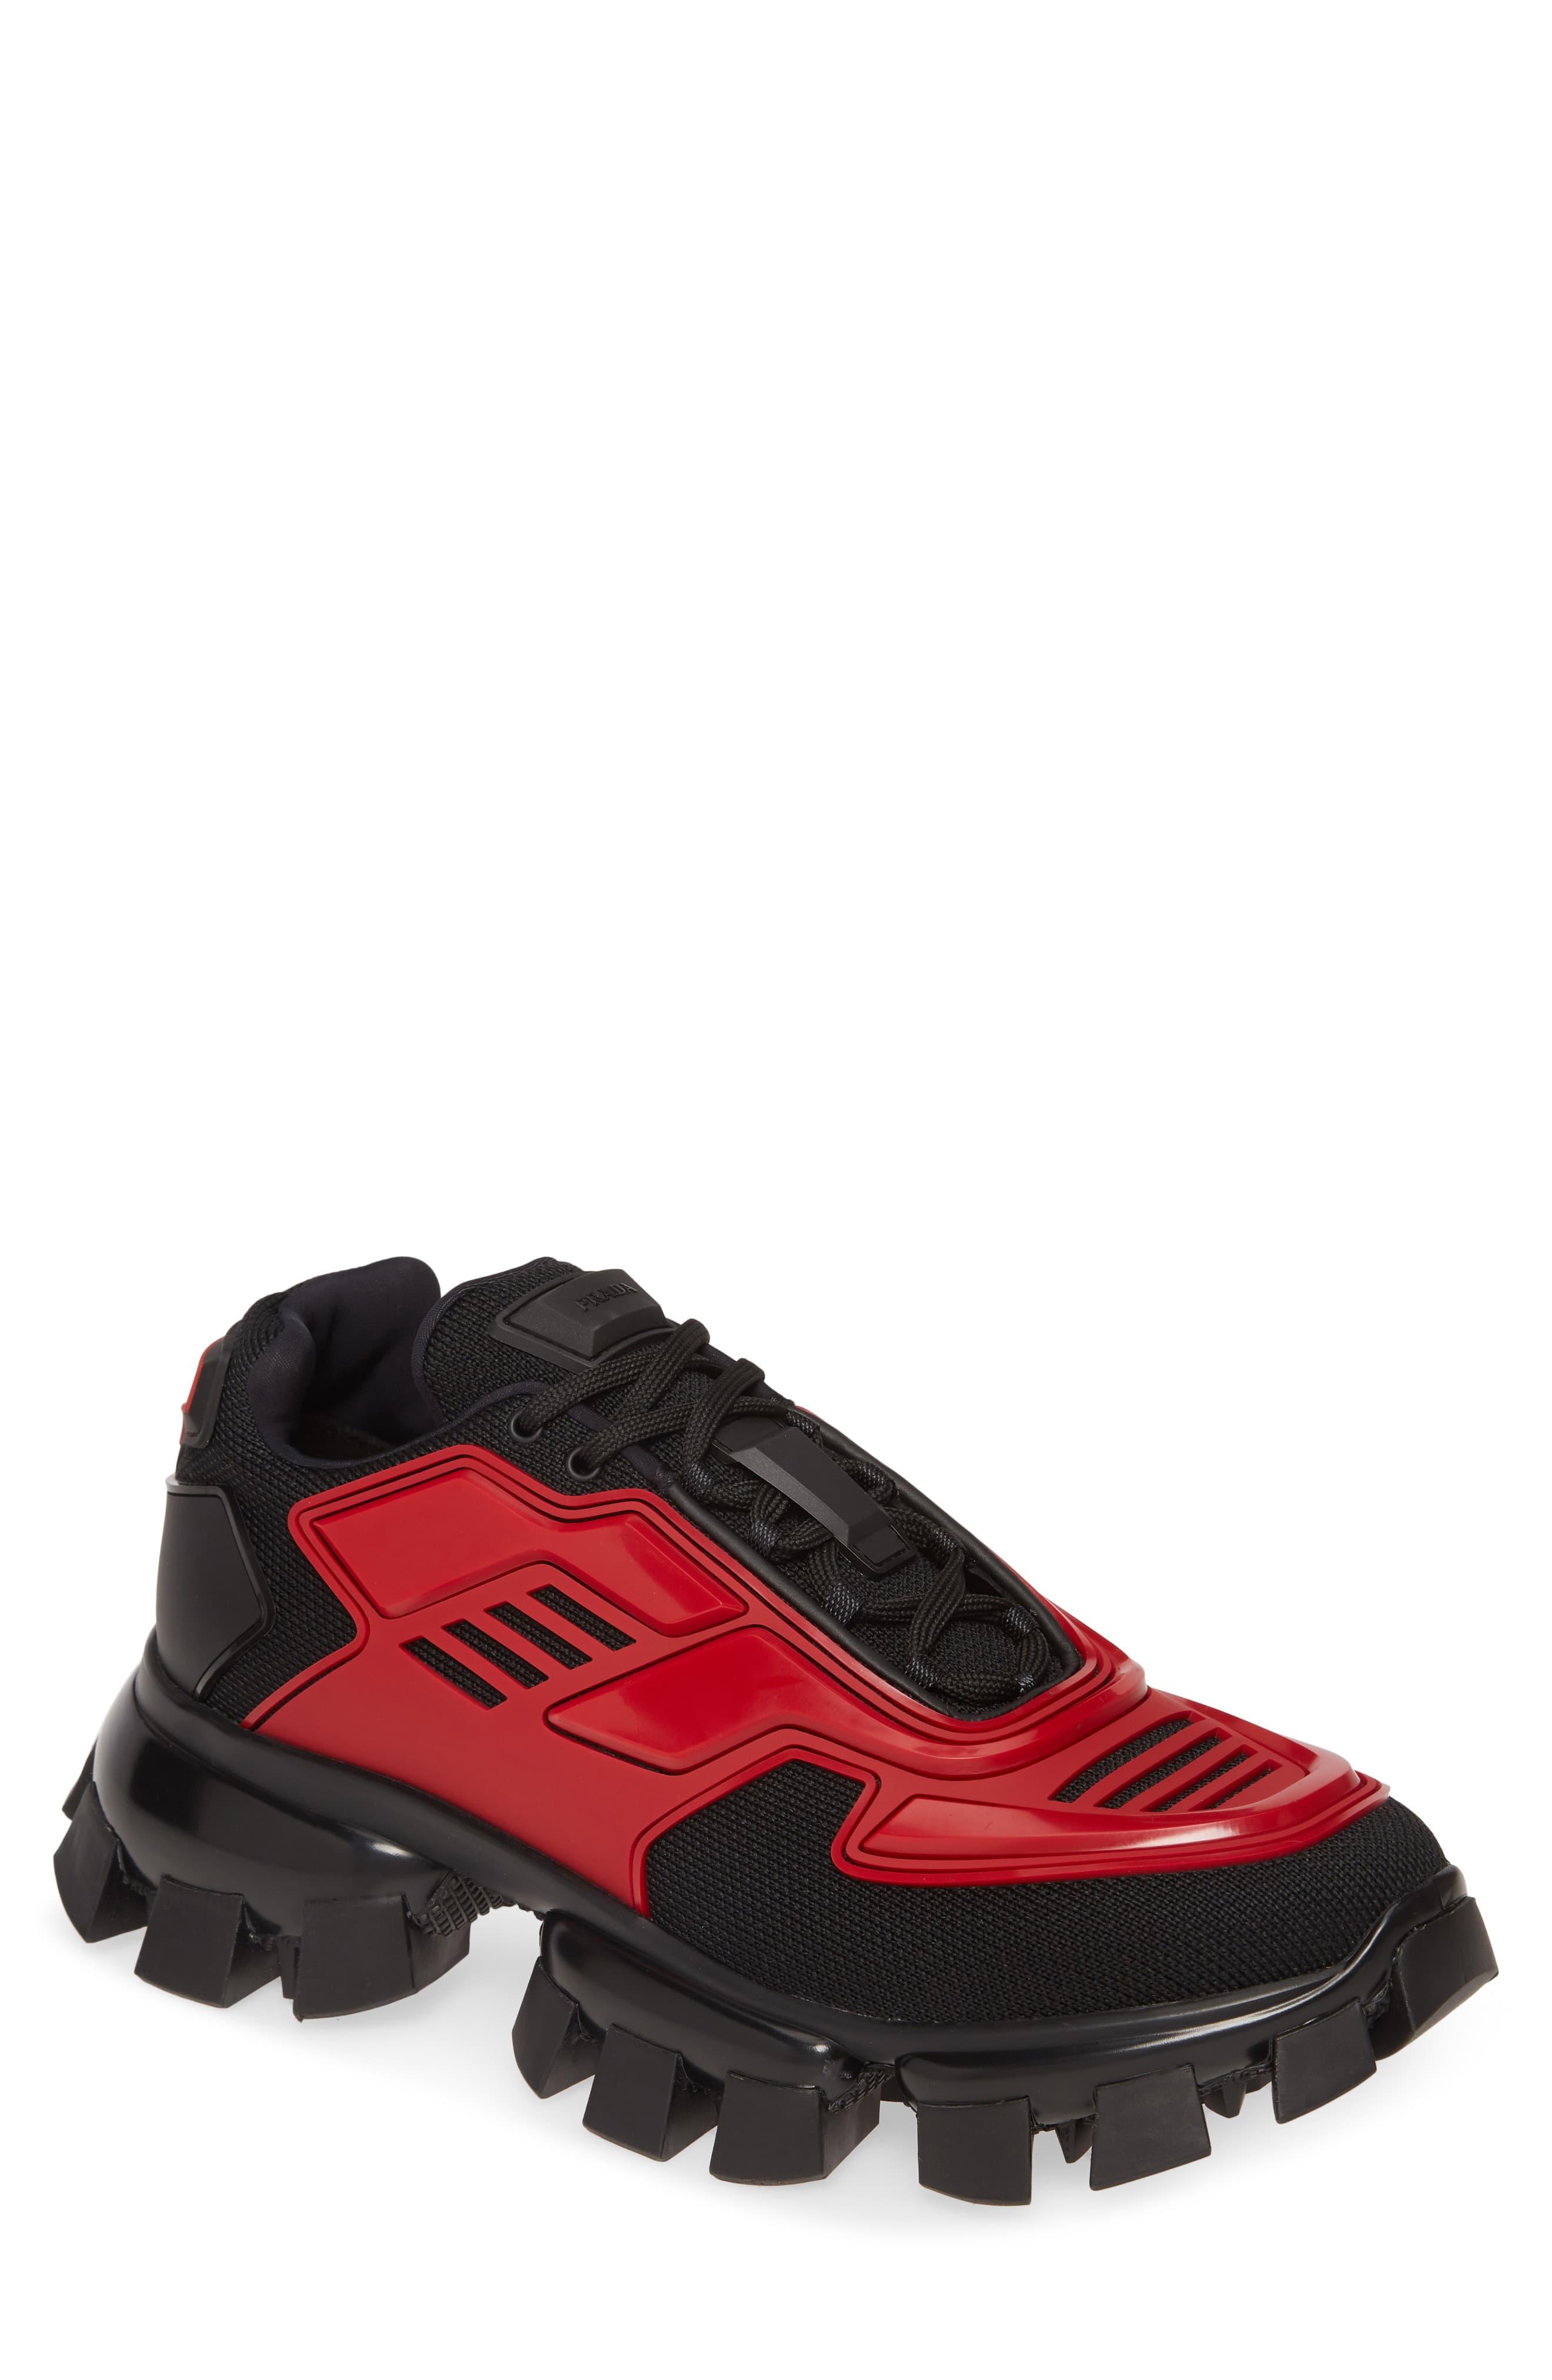 Prada Black And Red Cloudbust Thunder Sneakers for Men - Lyst